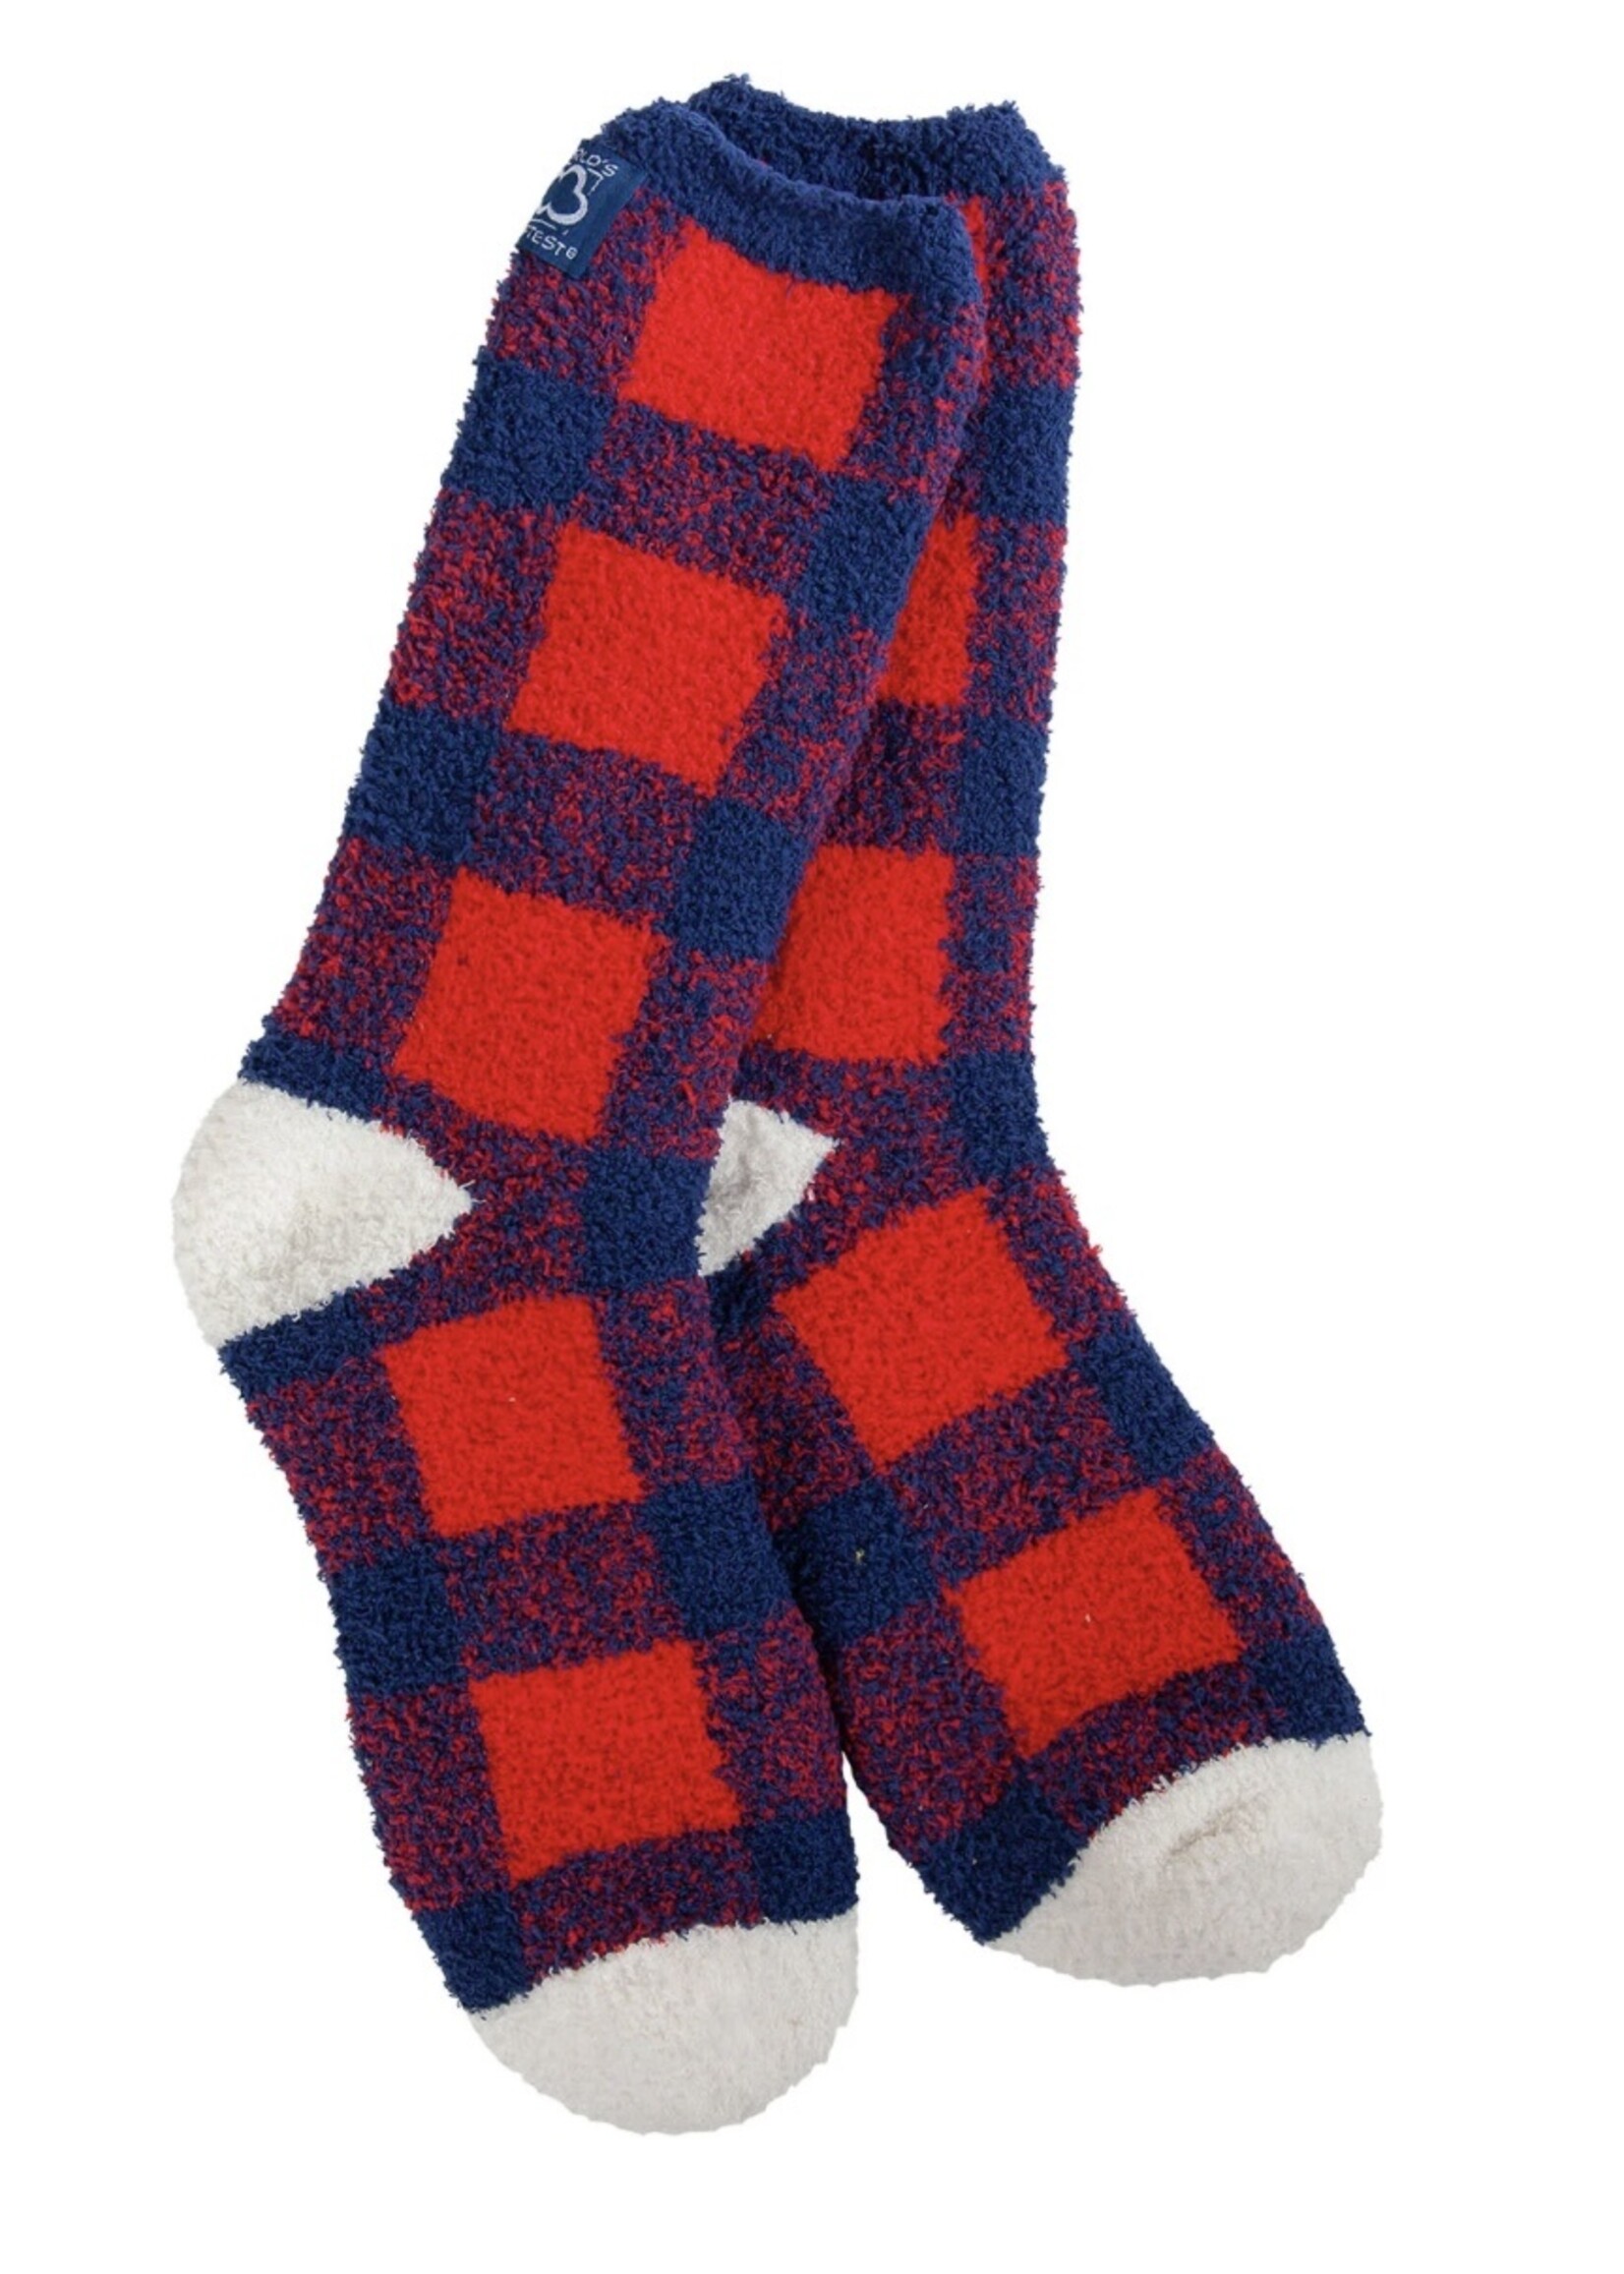 Team Collection Cozy Socks-Red/Blue